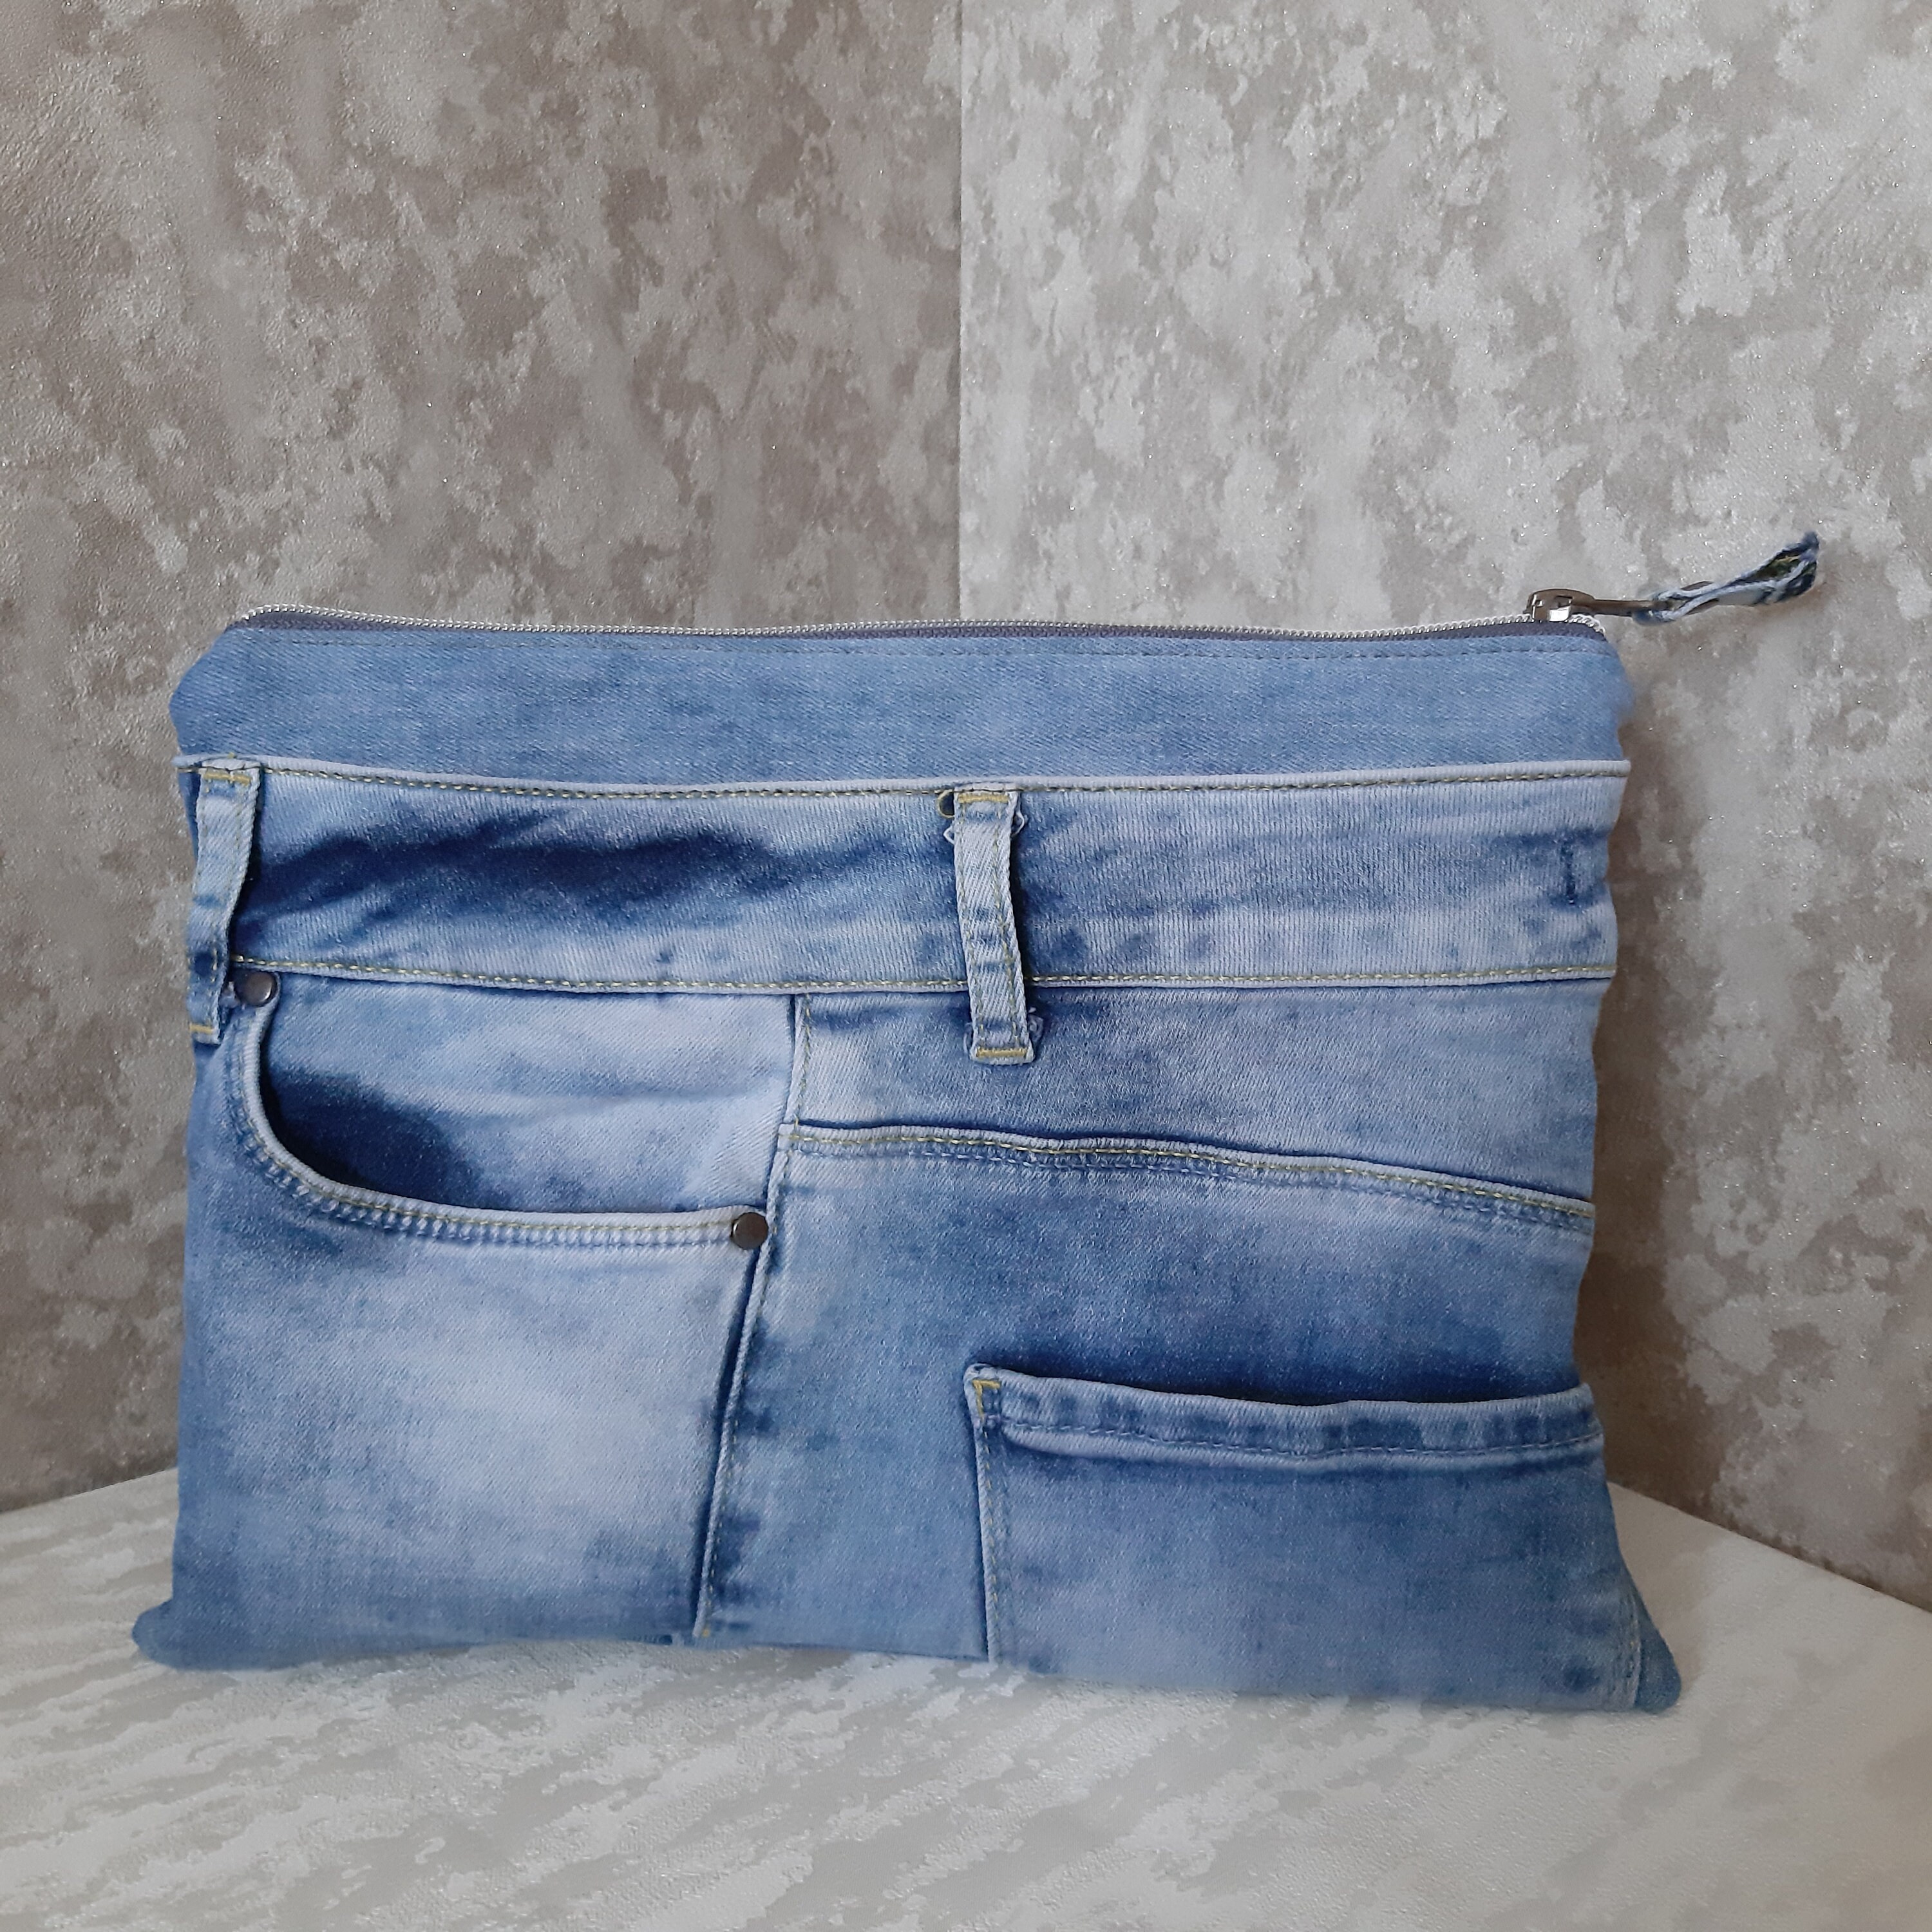 Blue Denim Clutch Bag Casual Clutch Bag of Recycled Jeans | Etsy